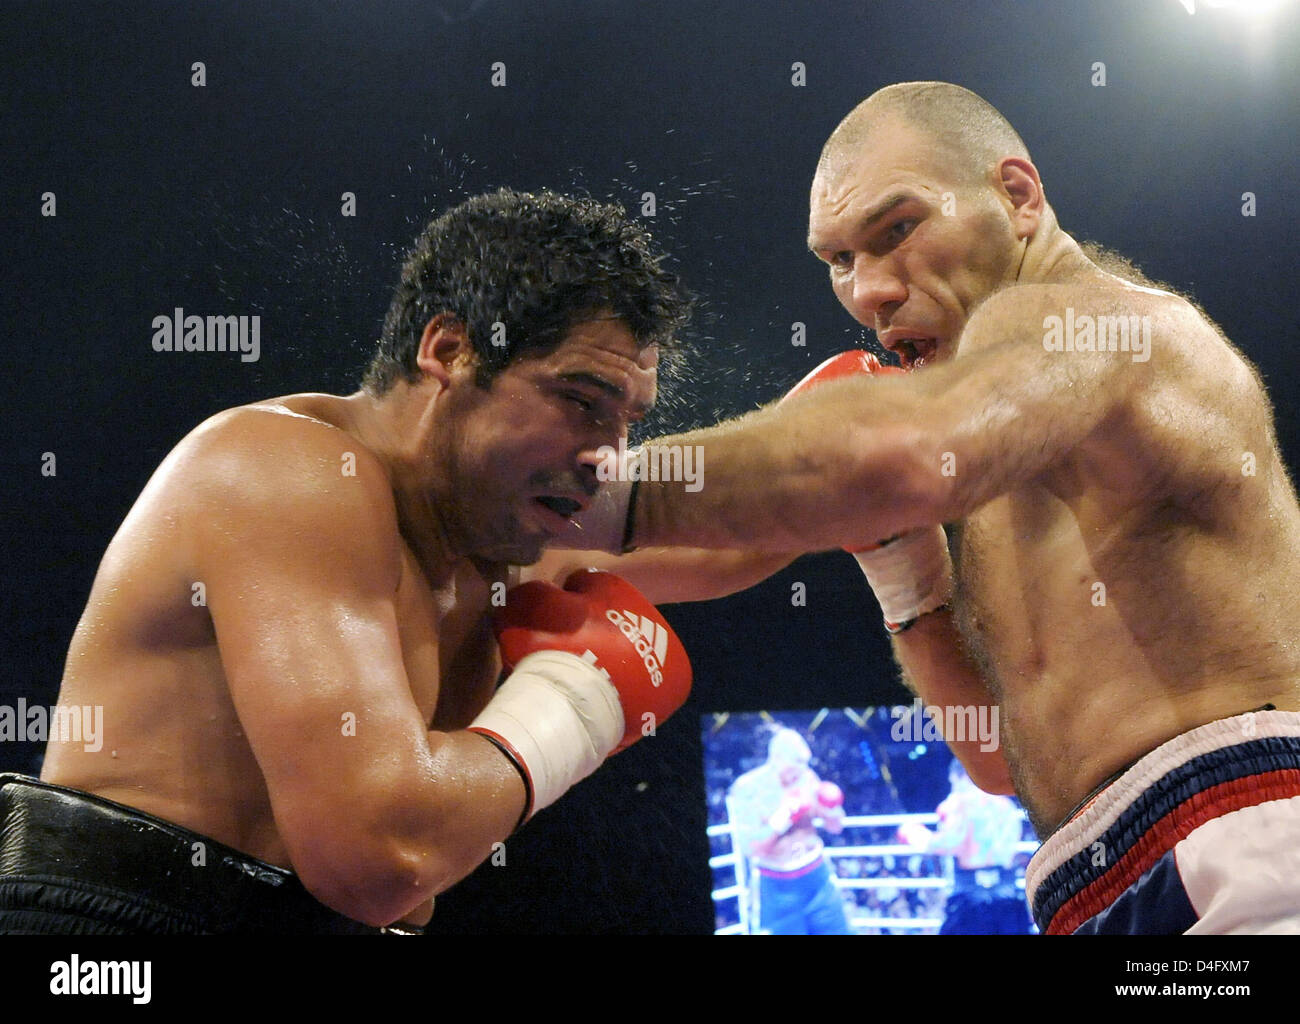 Russian boxer Nikolai Valuev (R) fights US John Ruiz in the World Boxing Association (WBA) heavyweight title fight in Berlin, Germany, 30 August 2008. Valuev, who had lost the title in April 2007, won the fight in a split decision. Photo: Soeren Stache Stock Photo